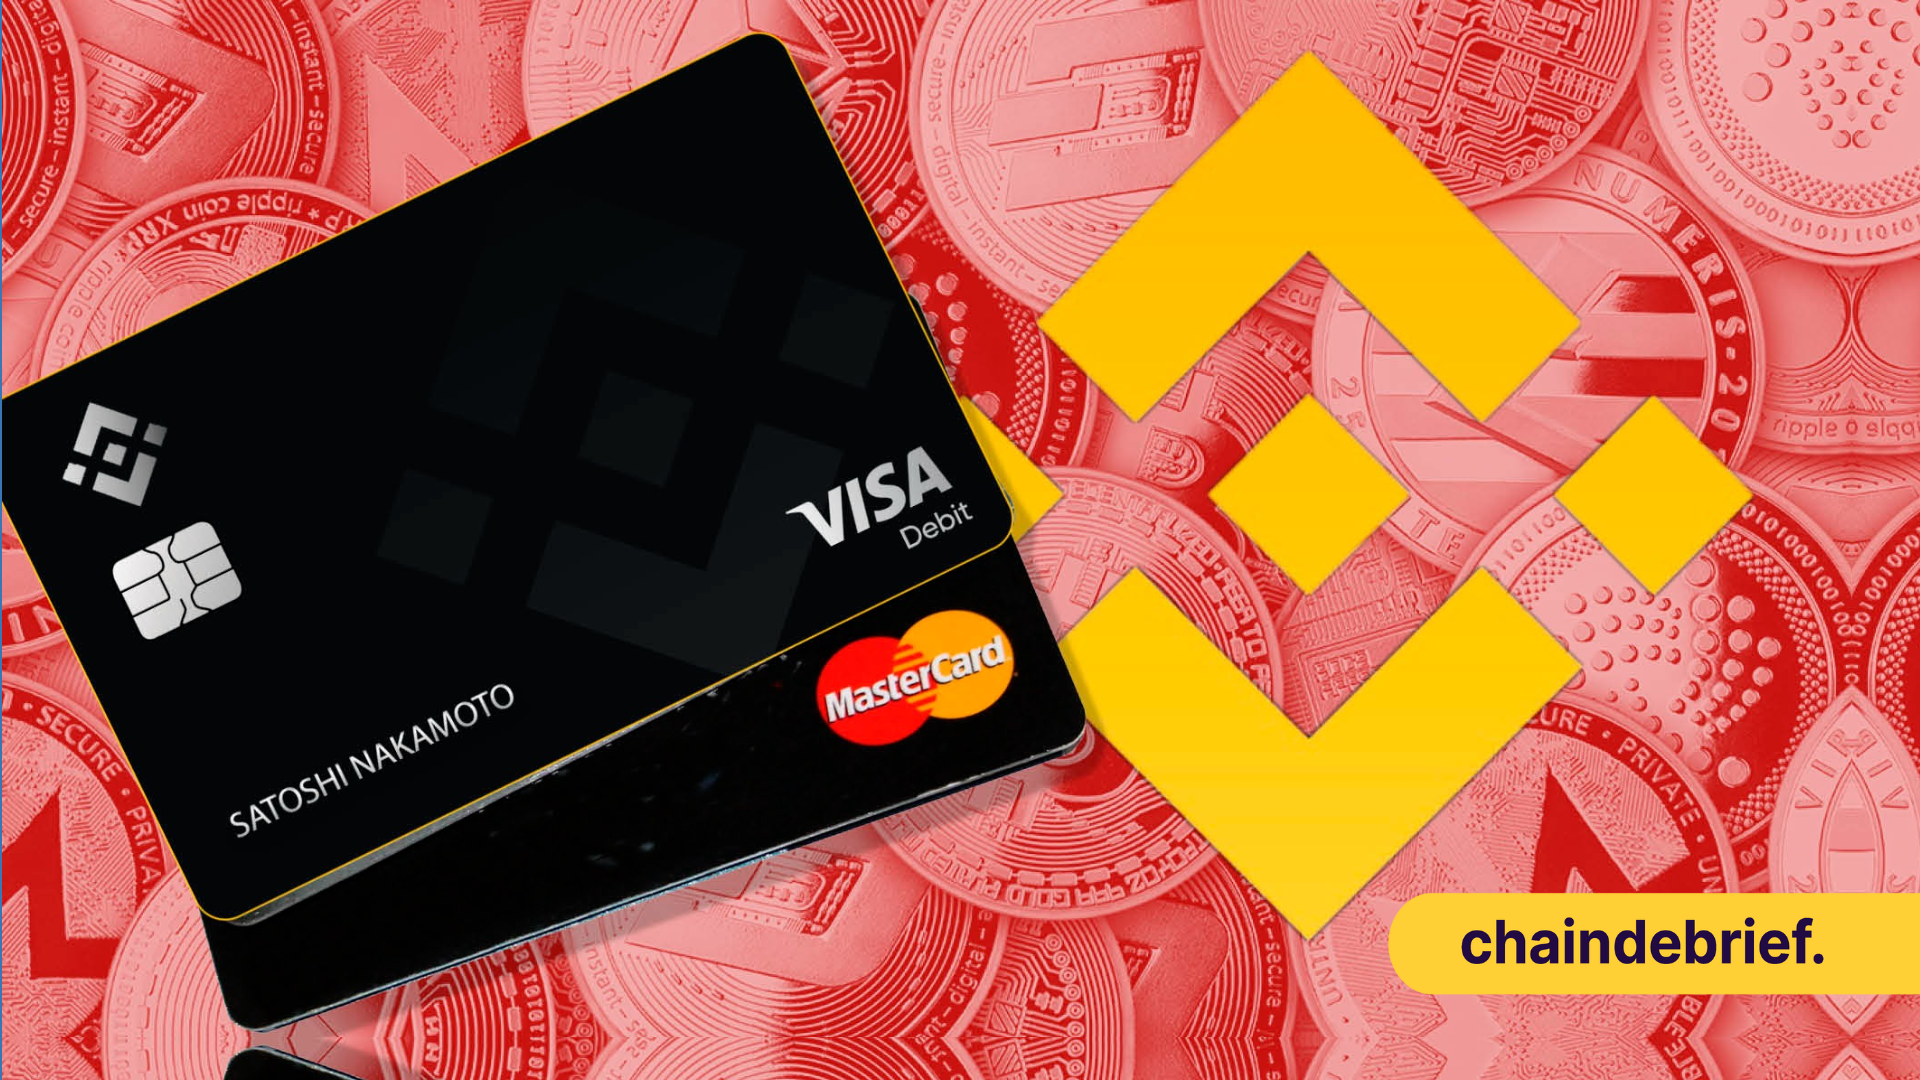 Juggernauts Binance & Mastercard Join Forces For Crypto Payment At Over 90 Million Merchants